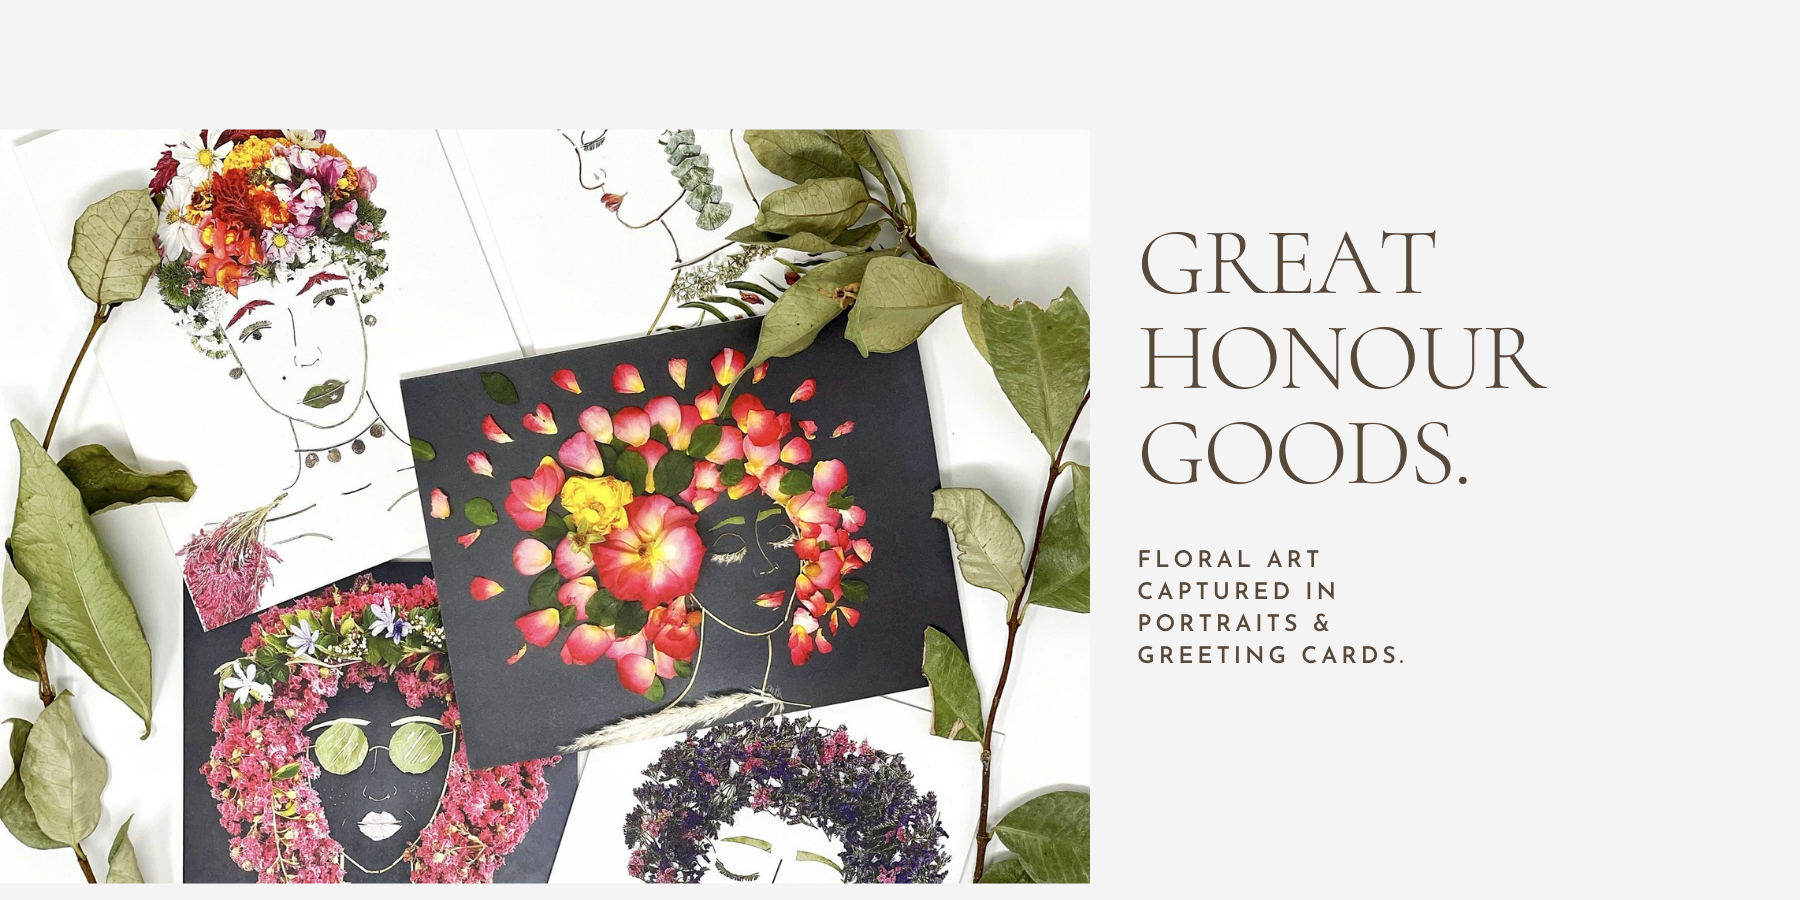 Miquela creates incredible floral artwork from sticks, flowers, and bits of greenery at Great Honour Goods. Available in 8x10 Art Prints & 5-packs of assorted greeting cards. 